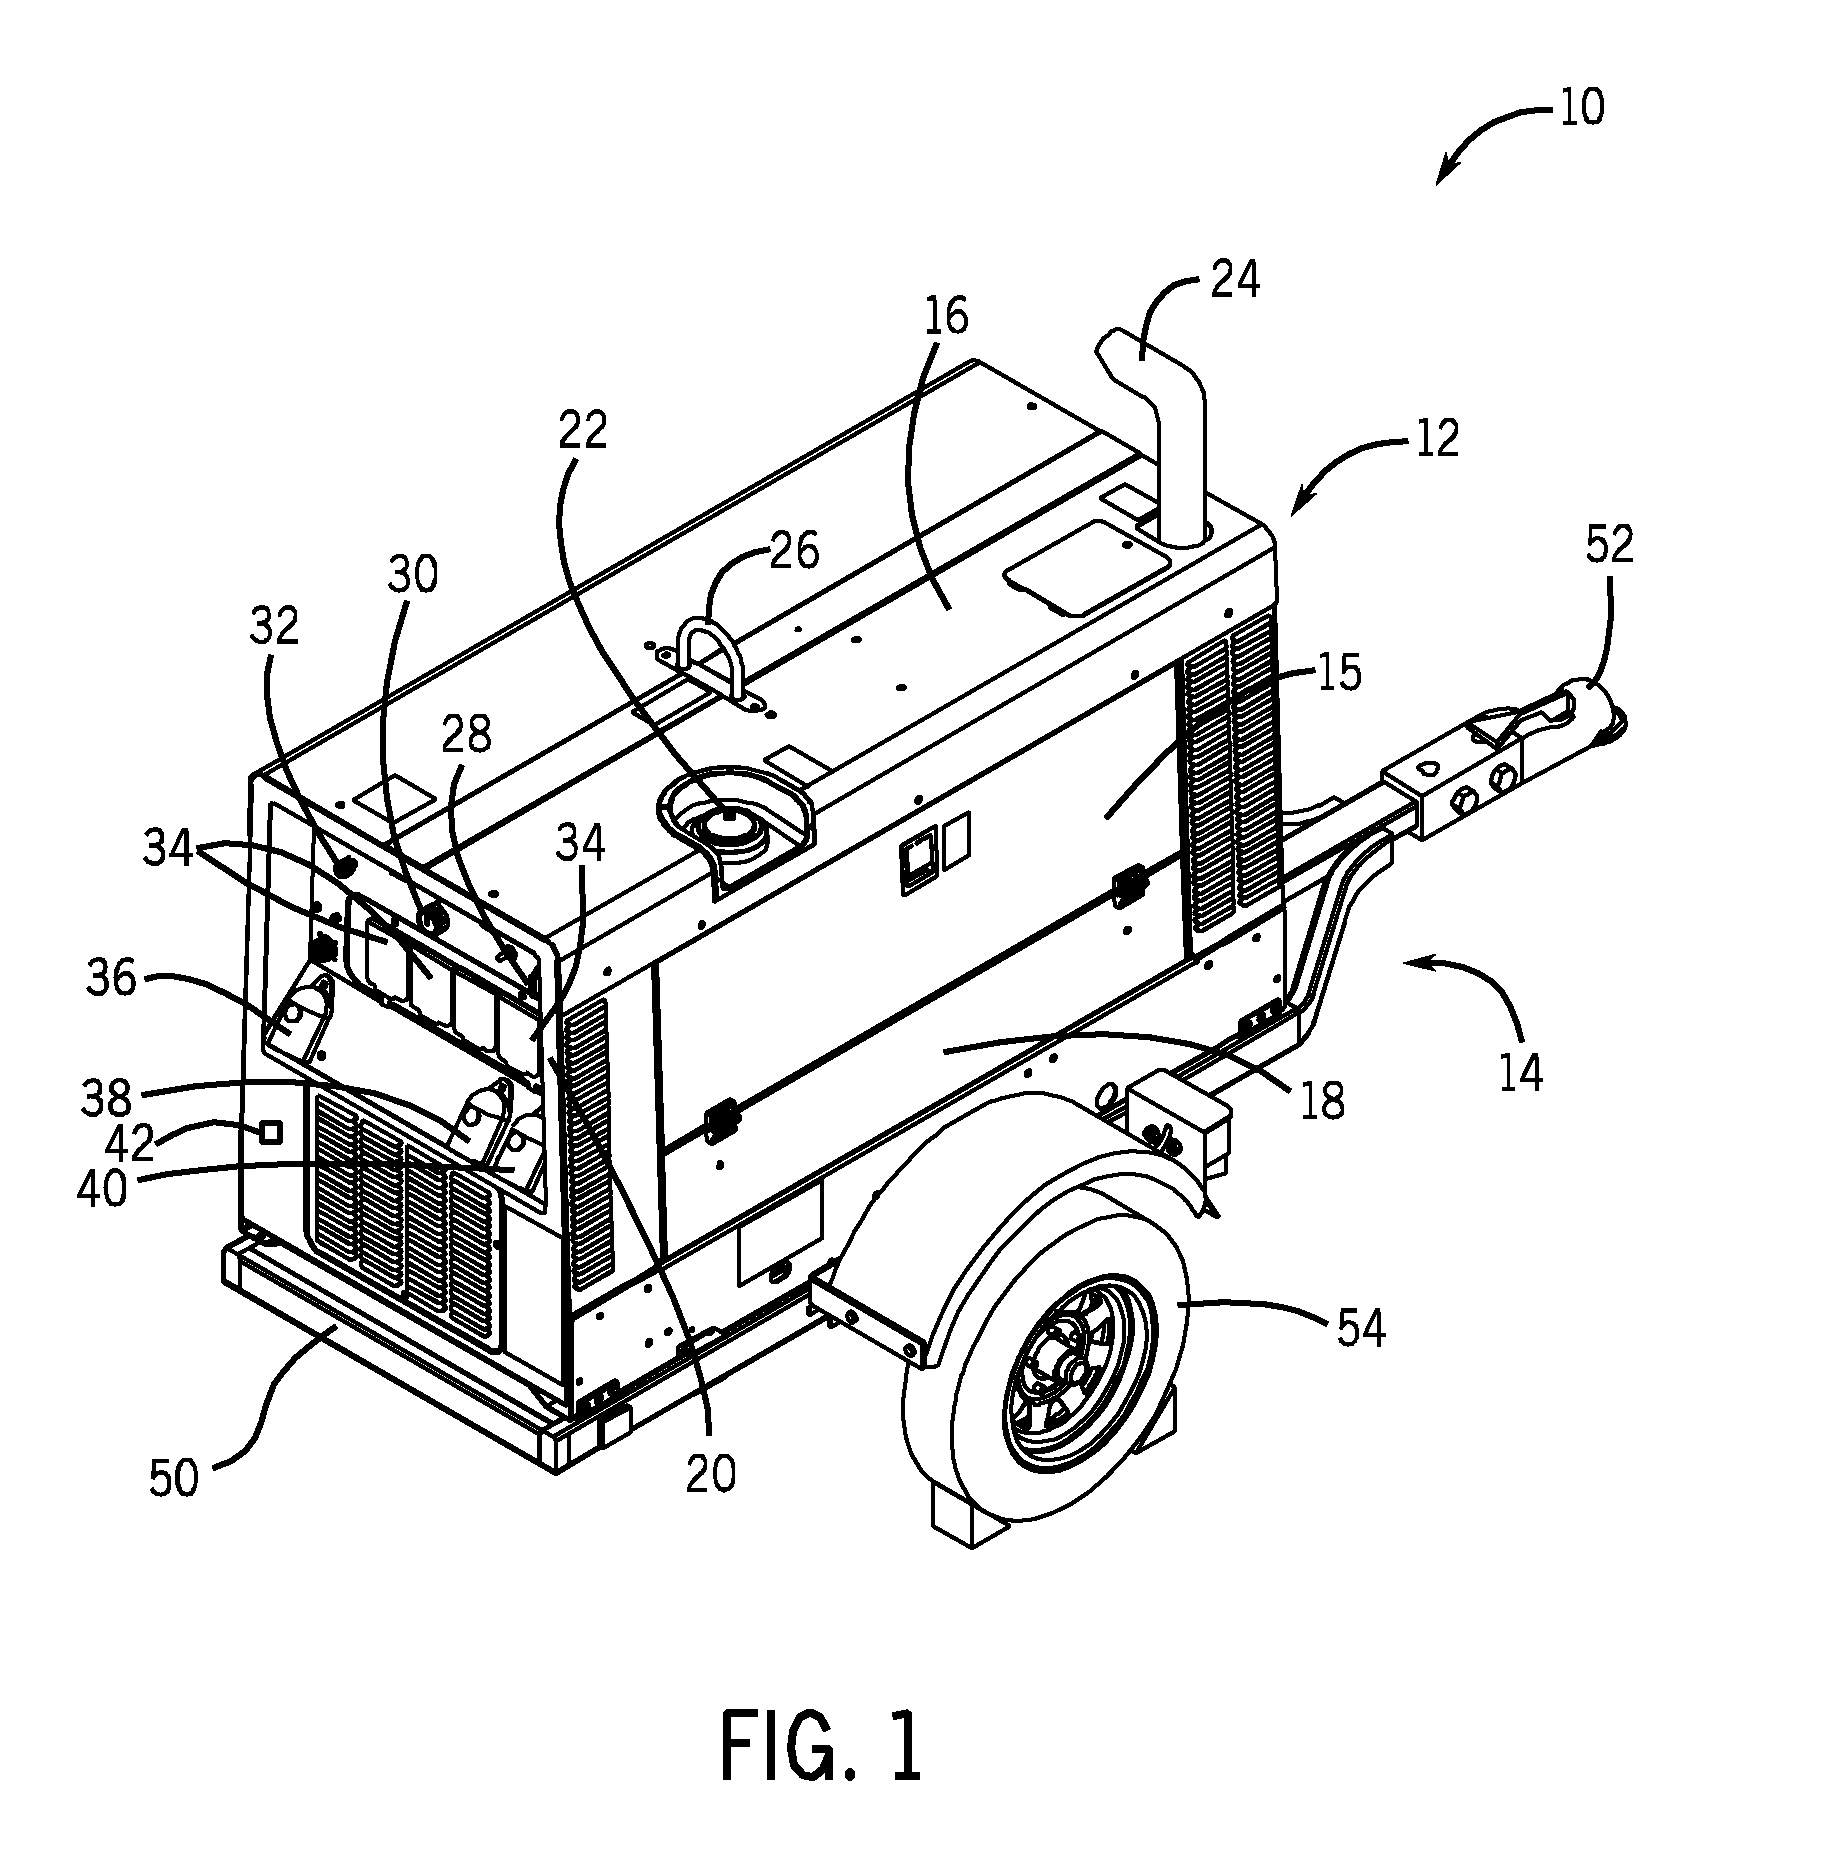 System and method for limiting welding output and ancillary features